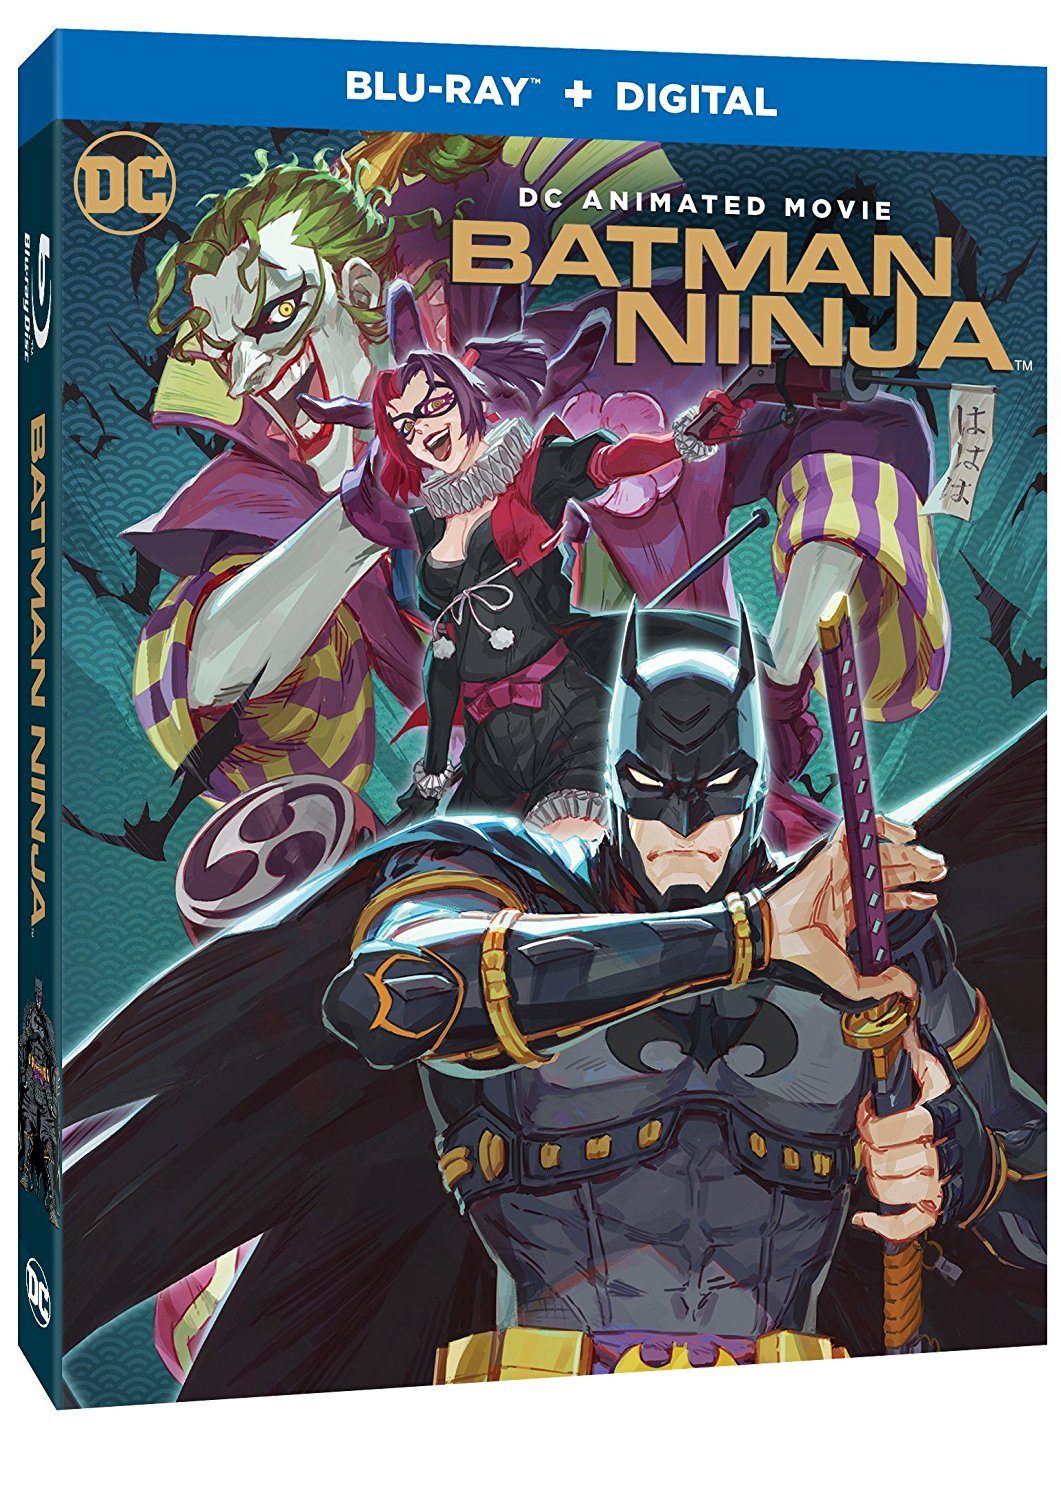 Batman Ninja Blu-ray cover art and special features revealed